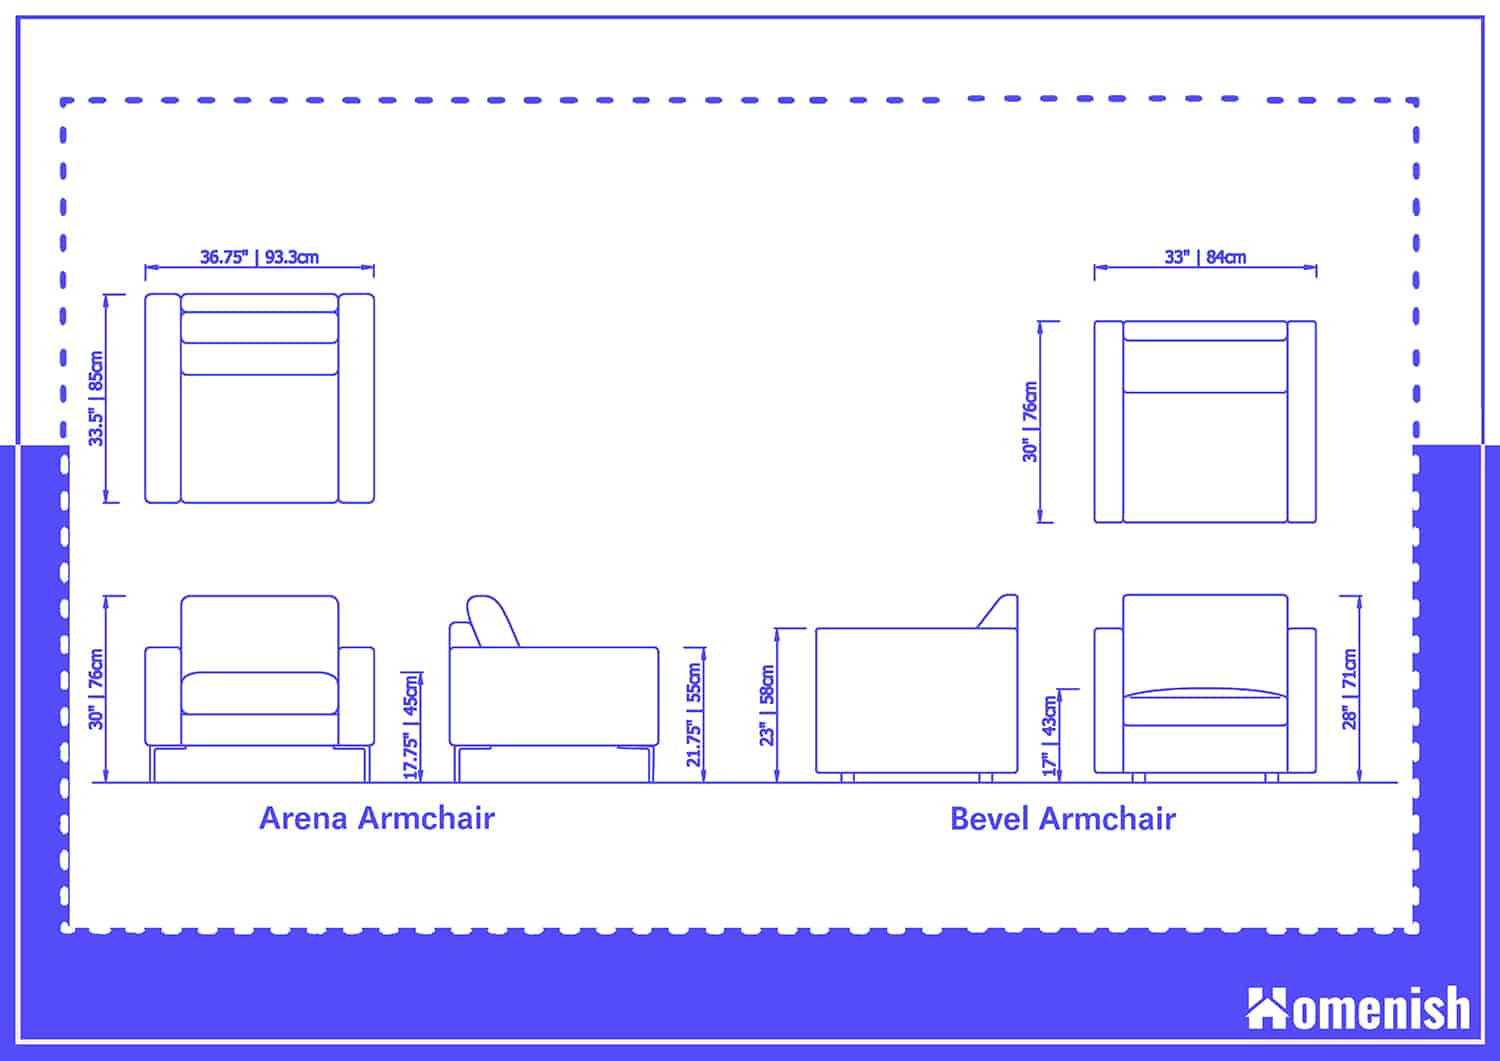 Arena and Bevel Armchair Dimensions